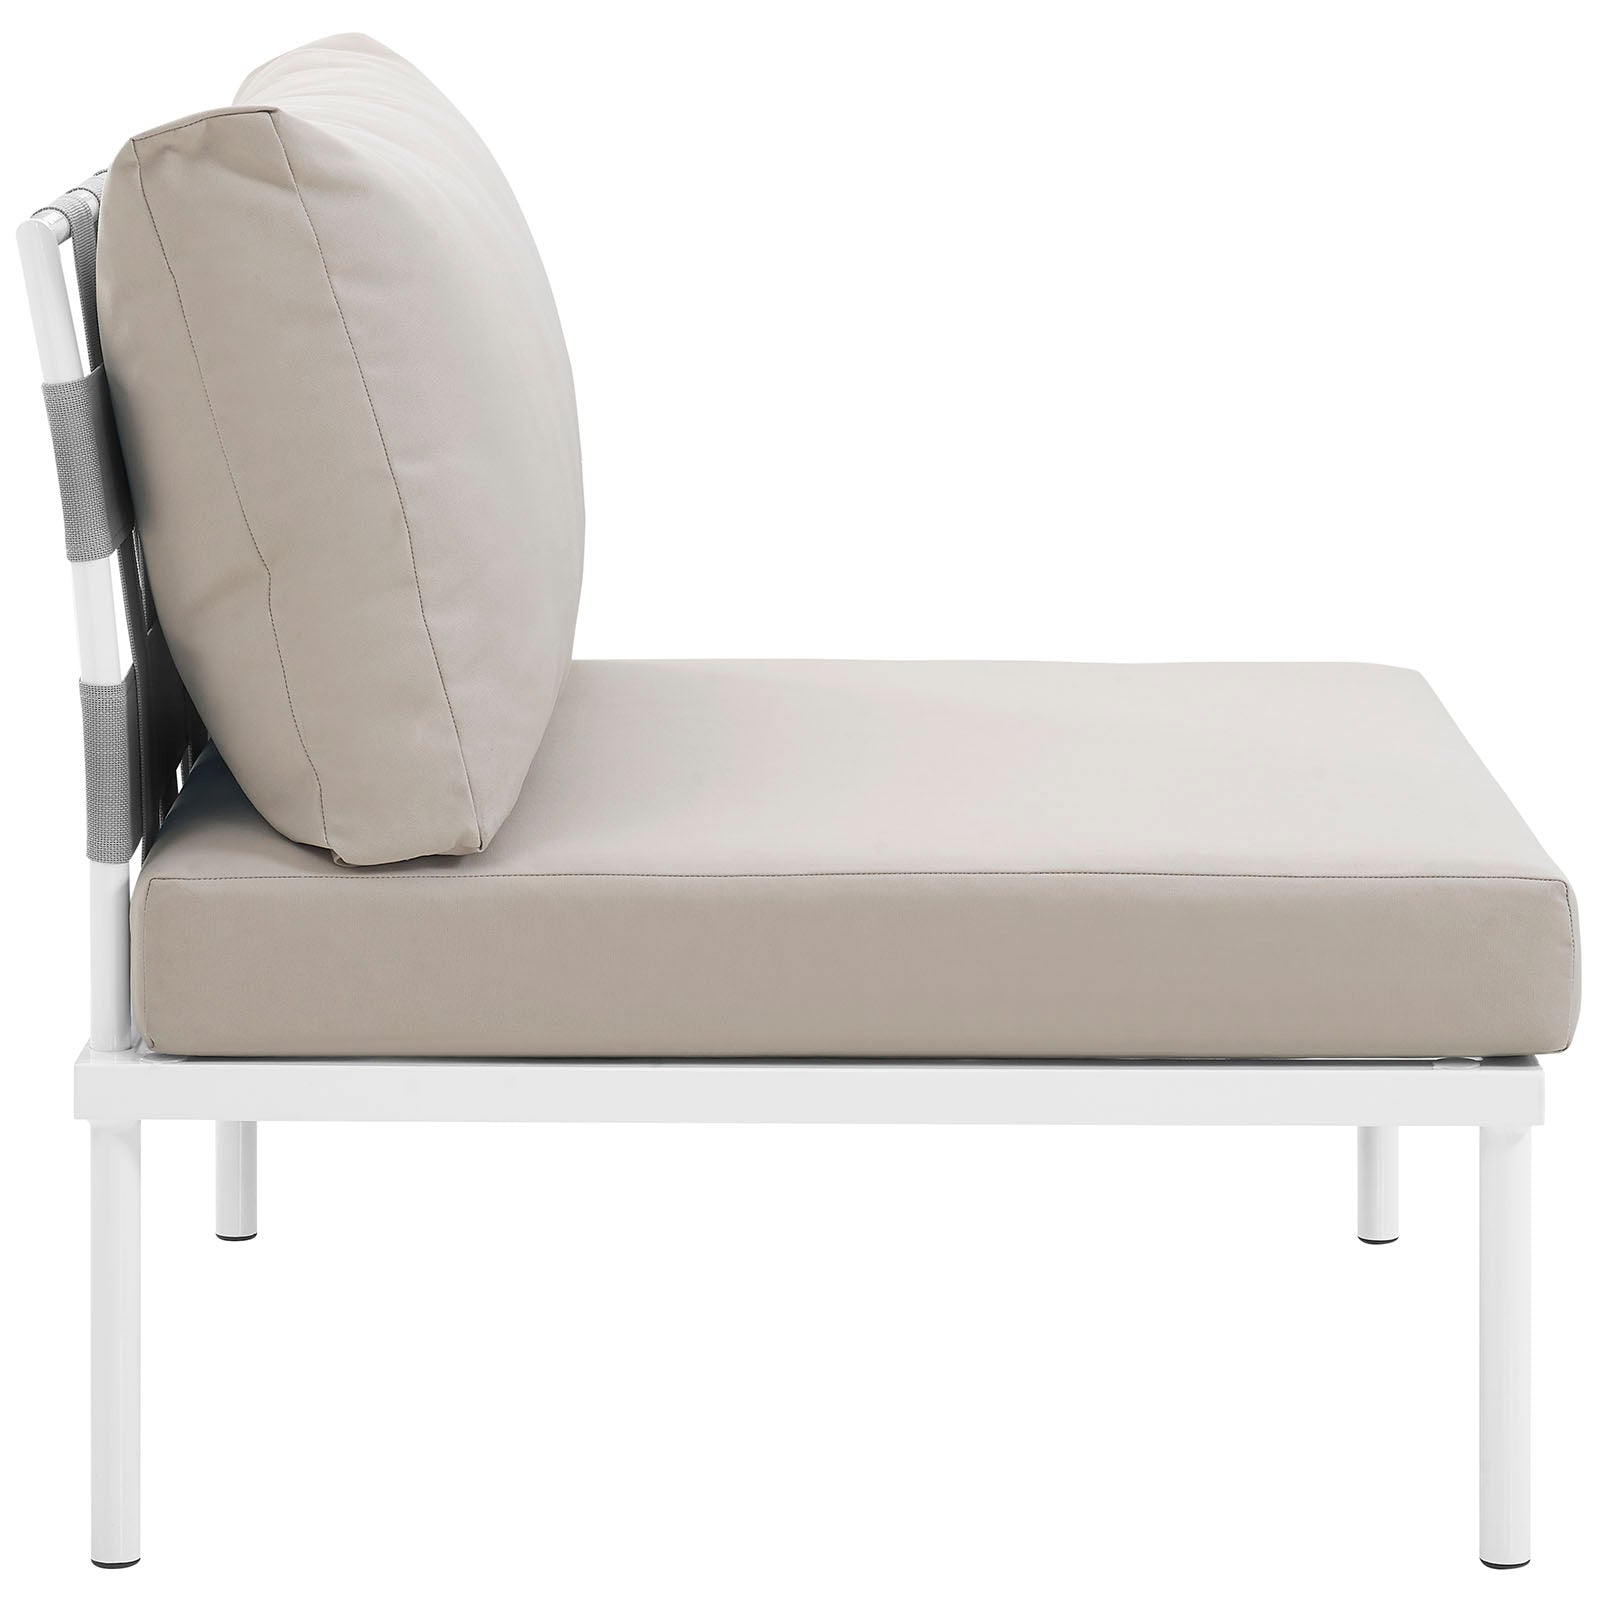 Modway Outdoor Chairs - Harmony Armless Outdoor Chair White & Beige